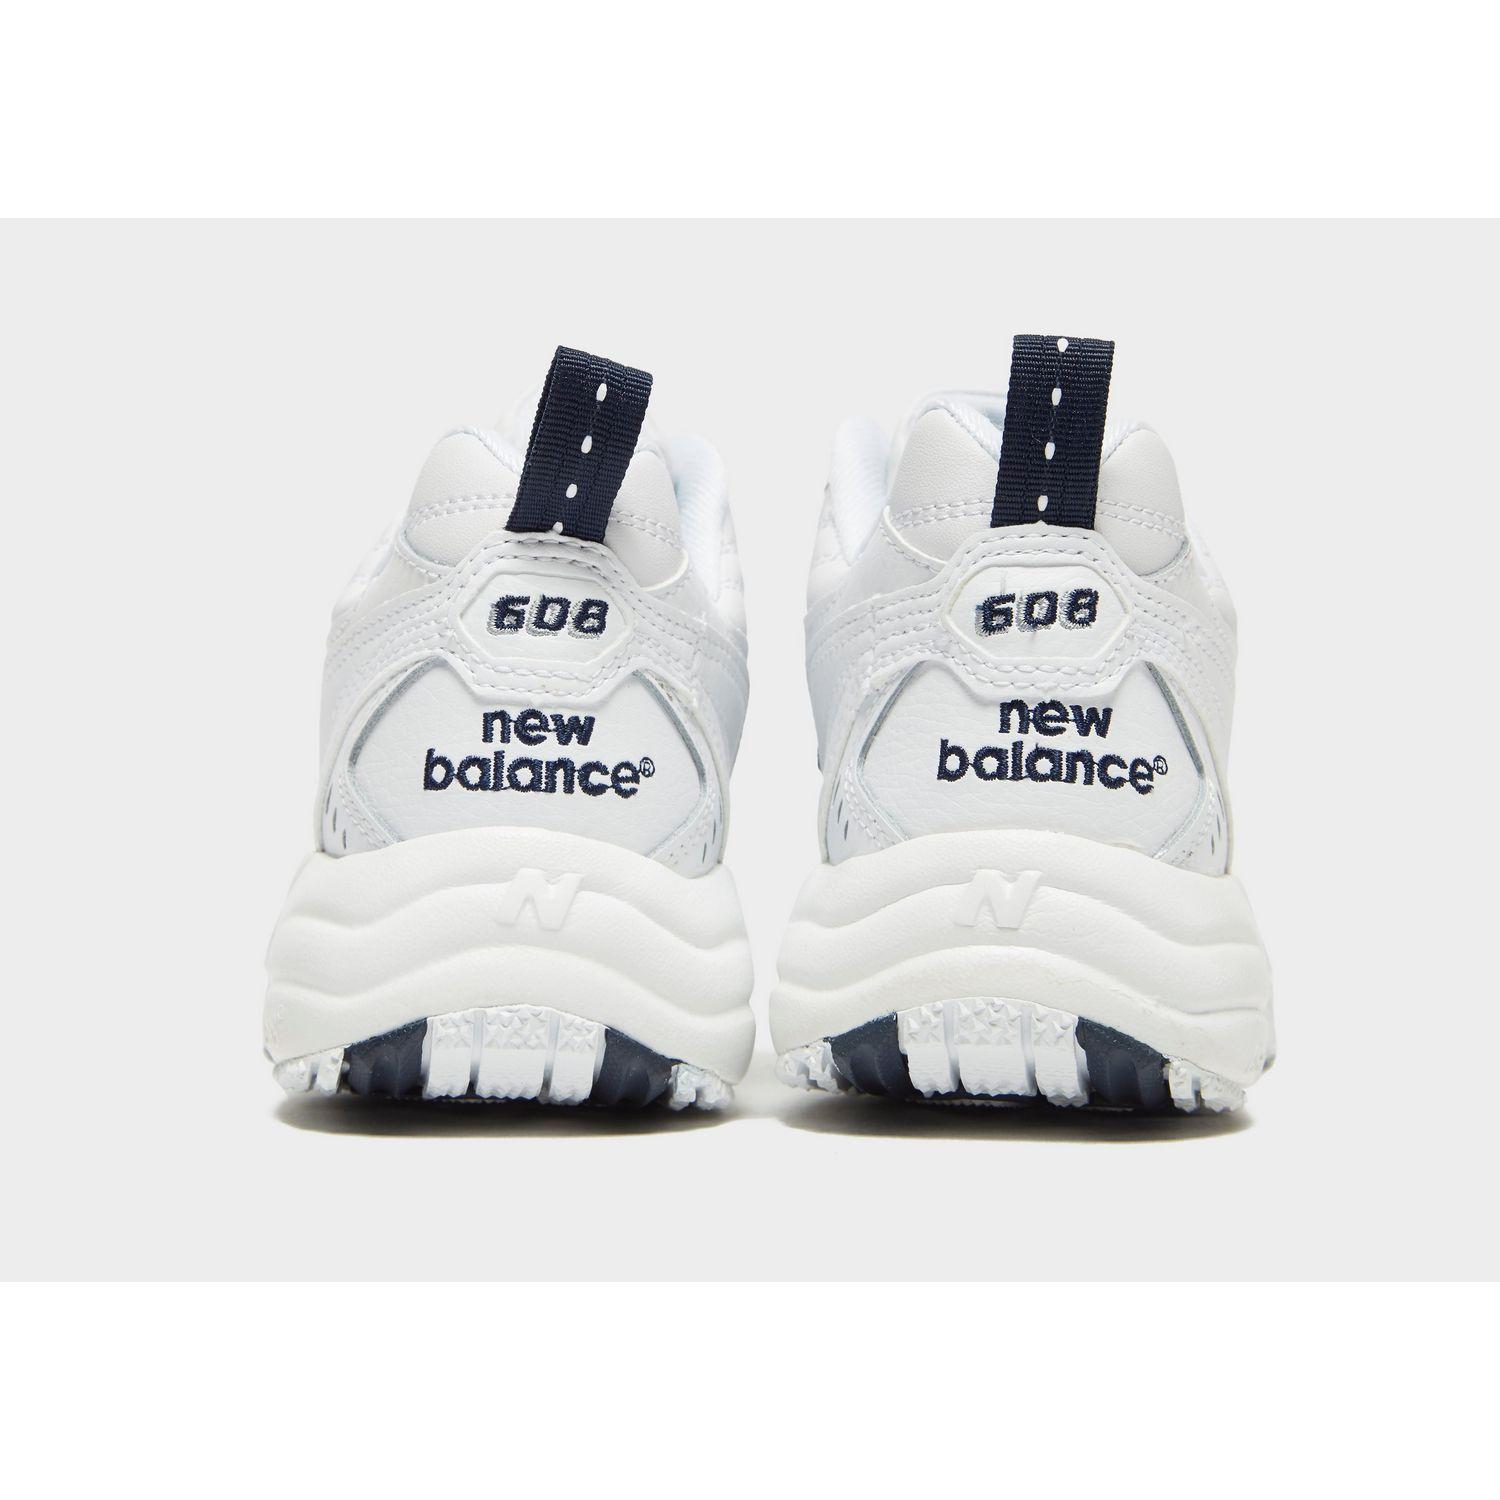 New Balance Leather 608 in White/Navy (White) - Lyst